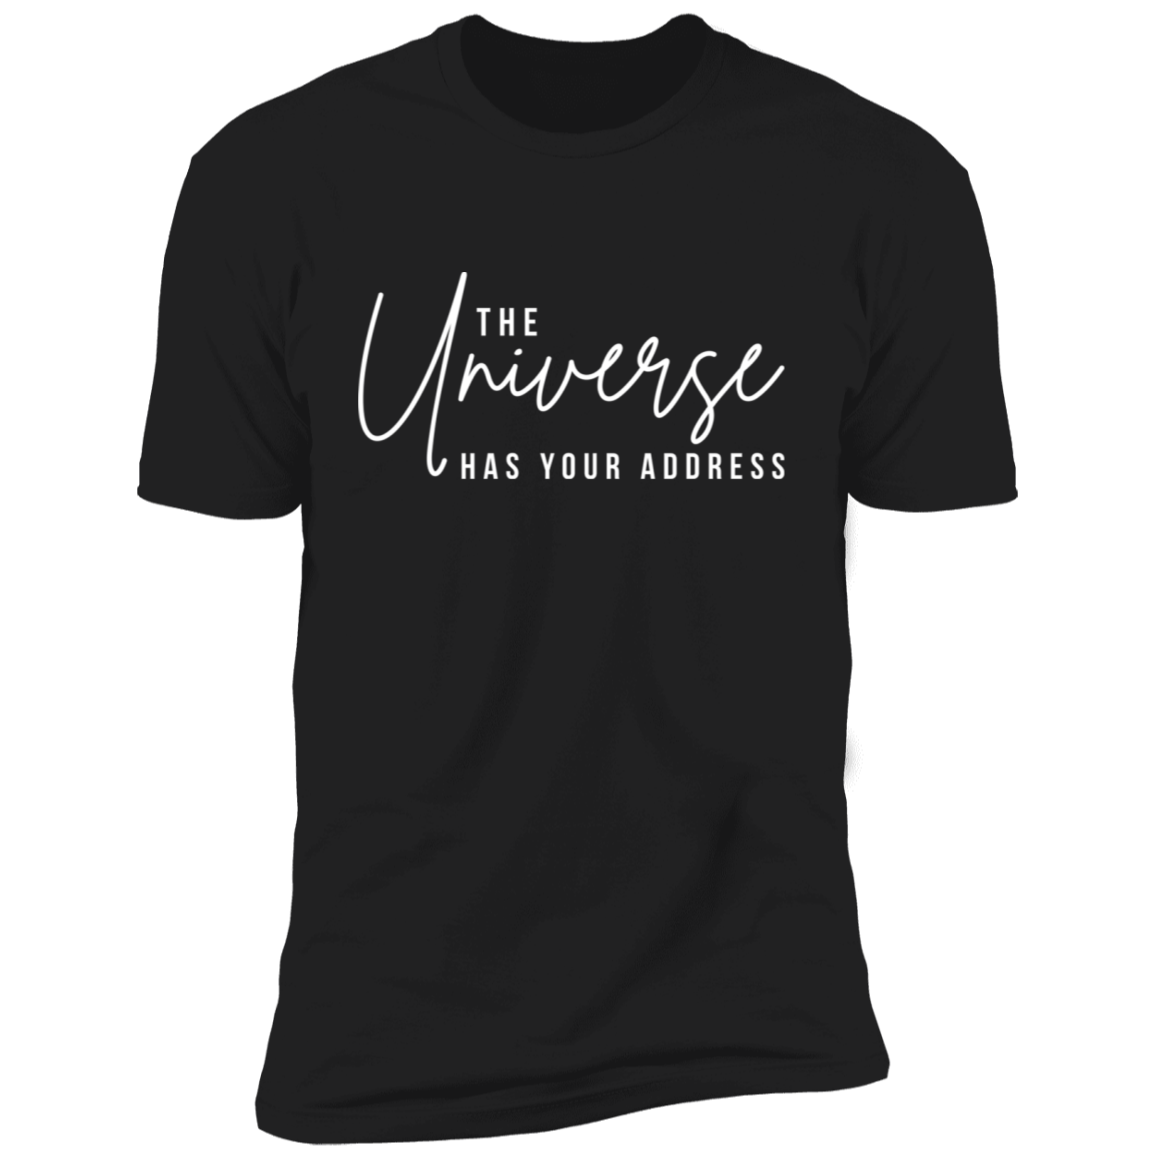 The Universe Has Your Address Tee